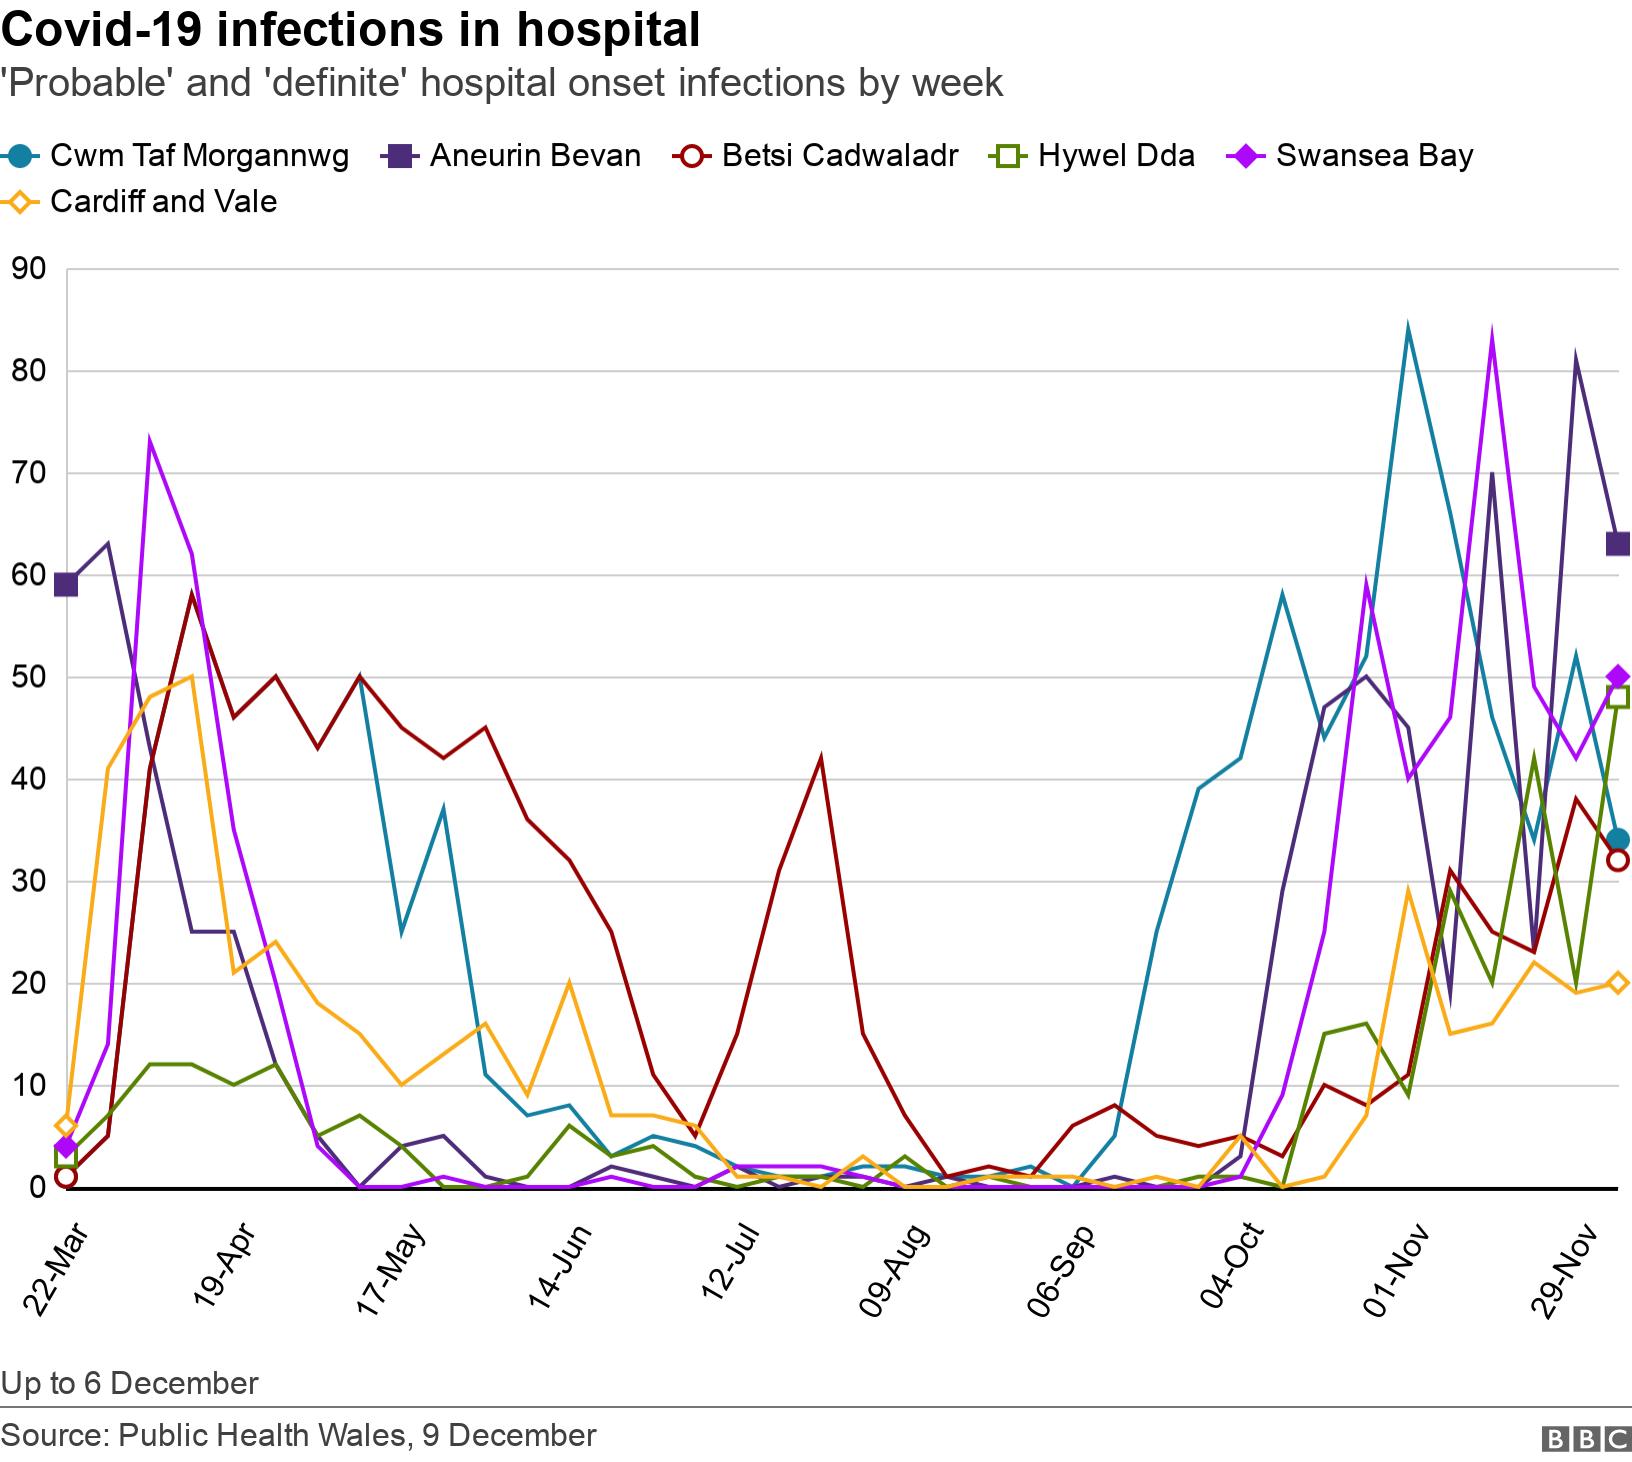 Covid-19 infections in hospital. 'Probable' and 'definite' hospital onset infections by week.  Up to 6 December.